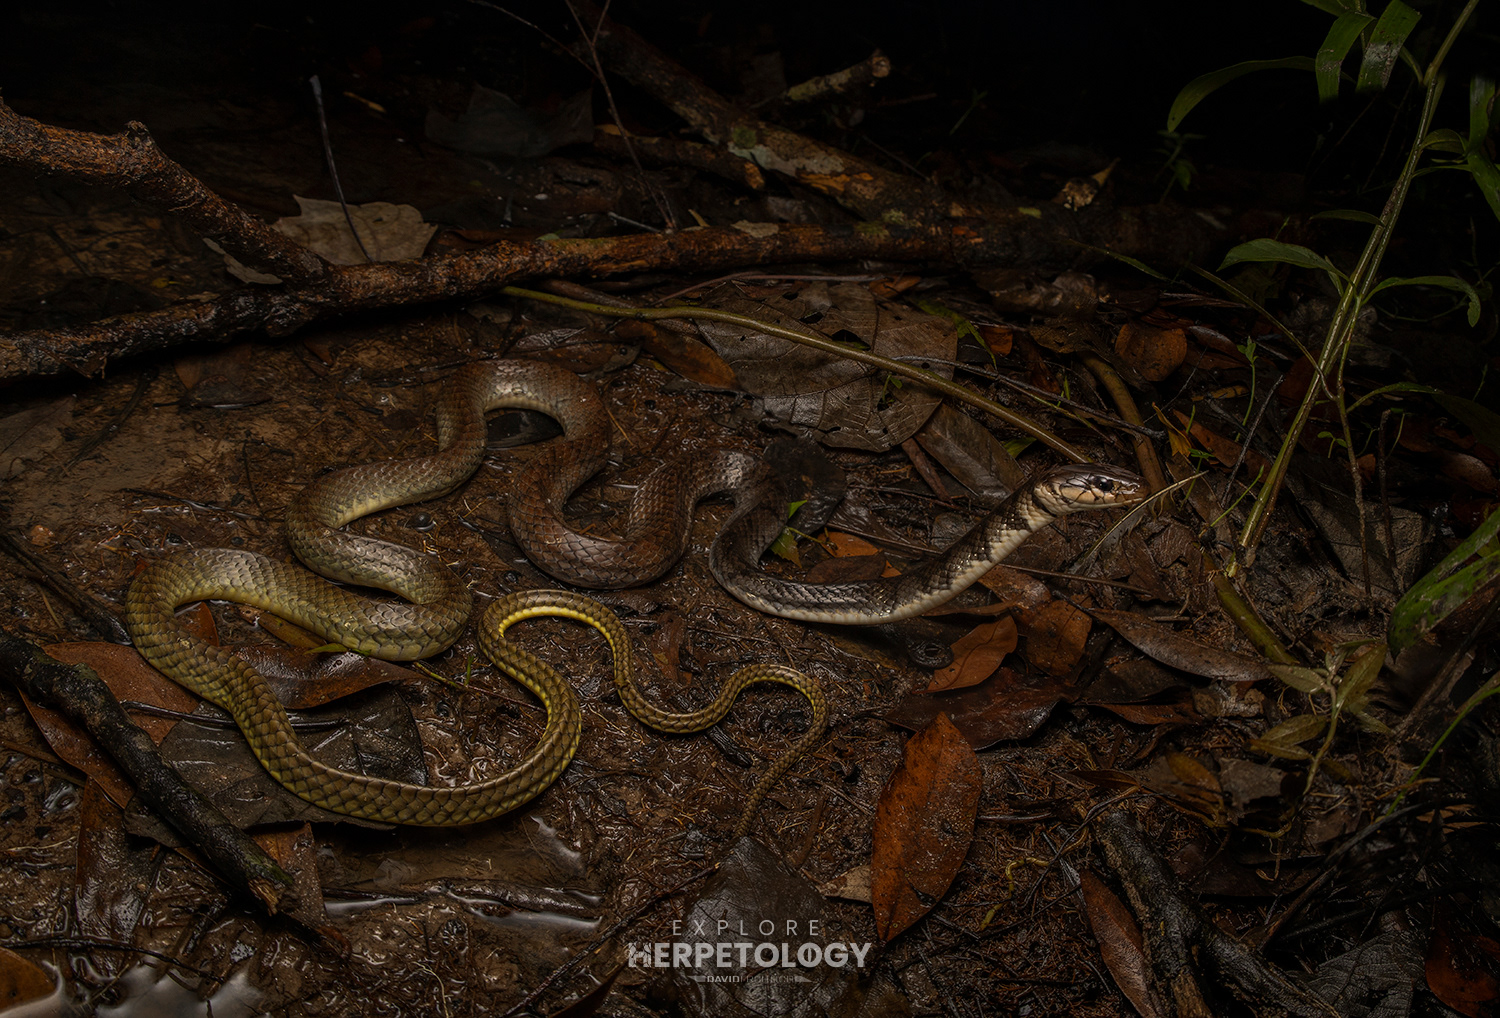 Snakes of Thailand -Cylindrophiidae (Pipe Snakes)